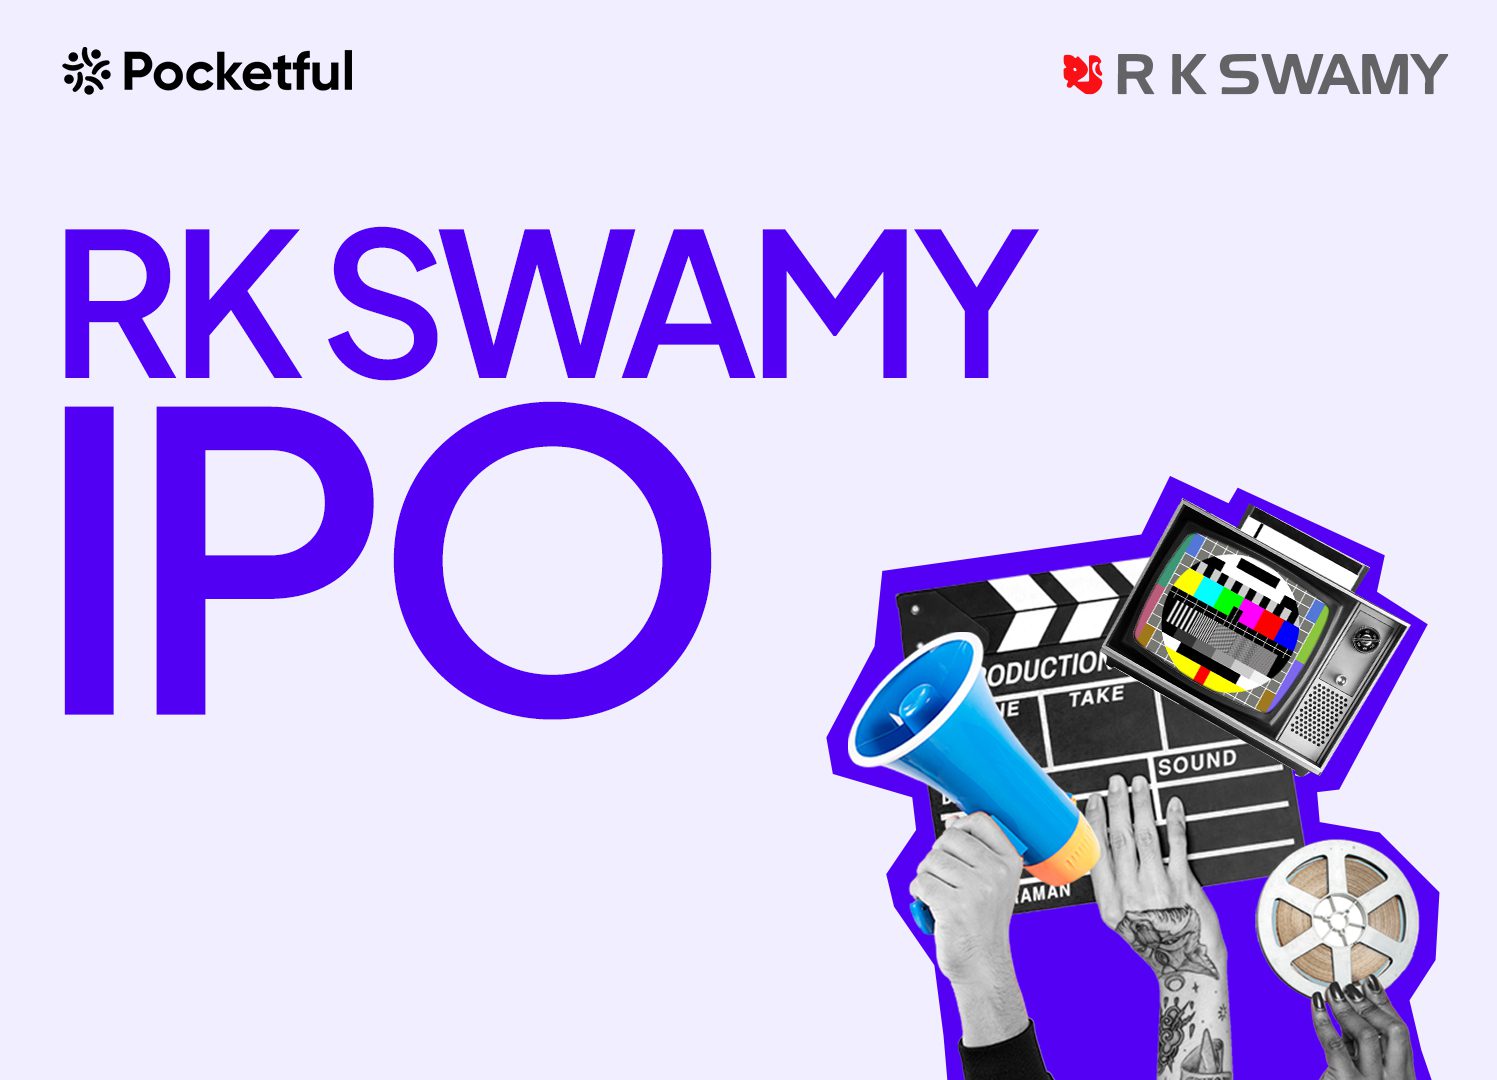 RK Swamy IPO: Business Model, Key Details, Financials, KPIs, Strengths, and Weaknesses